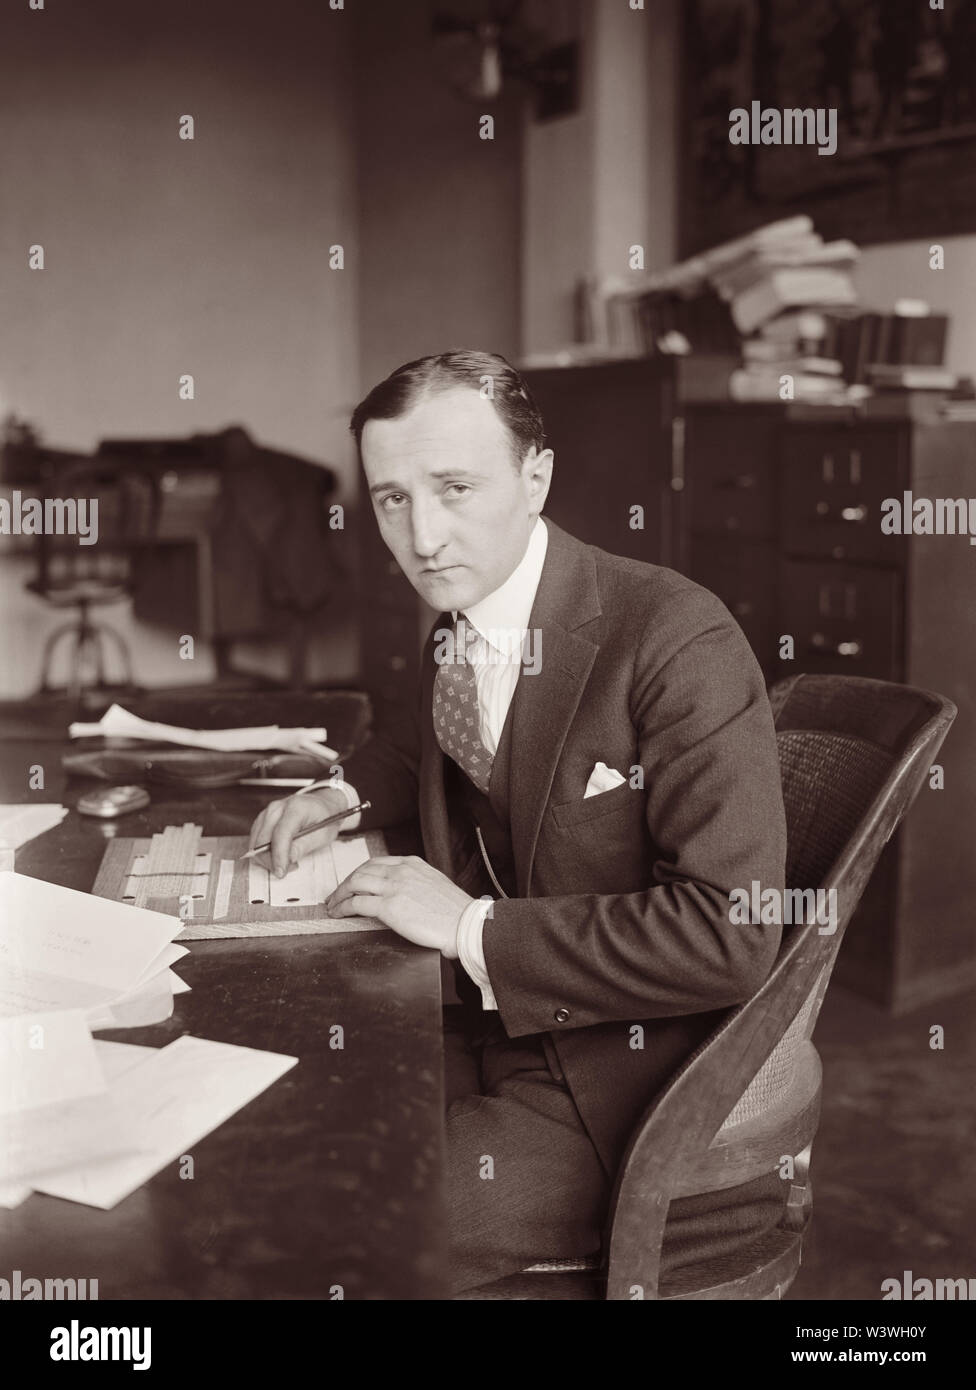 William Frederick Friedman (1891-1969), pictured in 1924, was a pioneering American cryptologist who became the chief cryptoanalyst in the Signal Intelligence Service of the War Department, notably leading the teams during WWII that broke various Japanese codes, including ultimately the Purple machine cipher initiated by Japan in 1939. Friedman was married to another notable pioneering cryptologist, Elizebeth Smith Friedman. Stock Photo